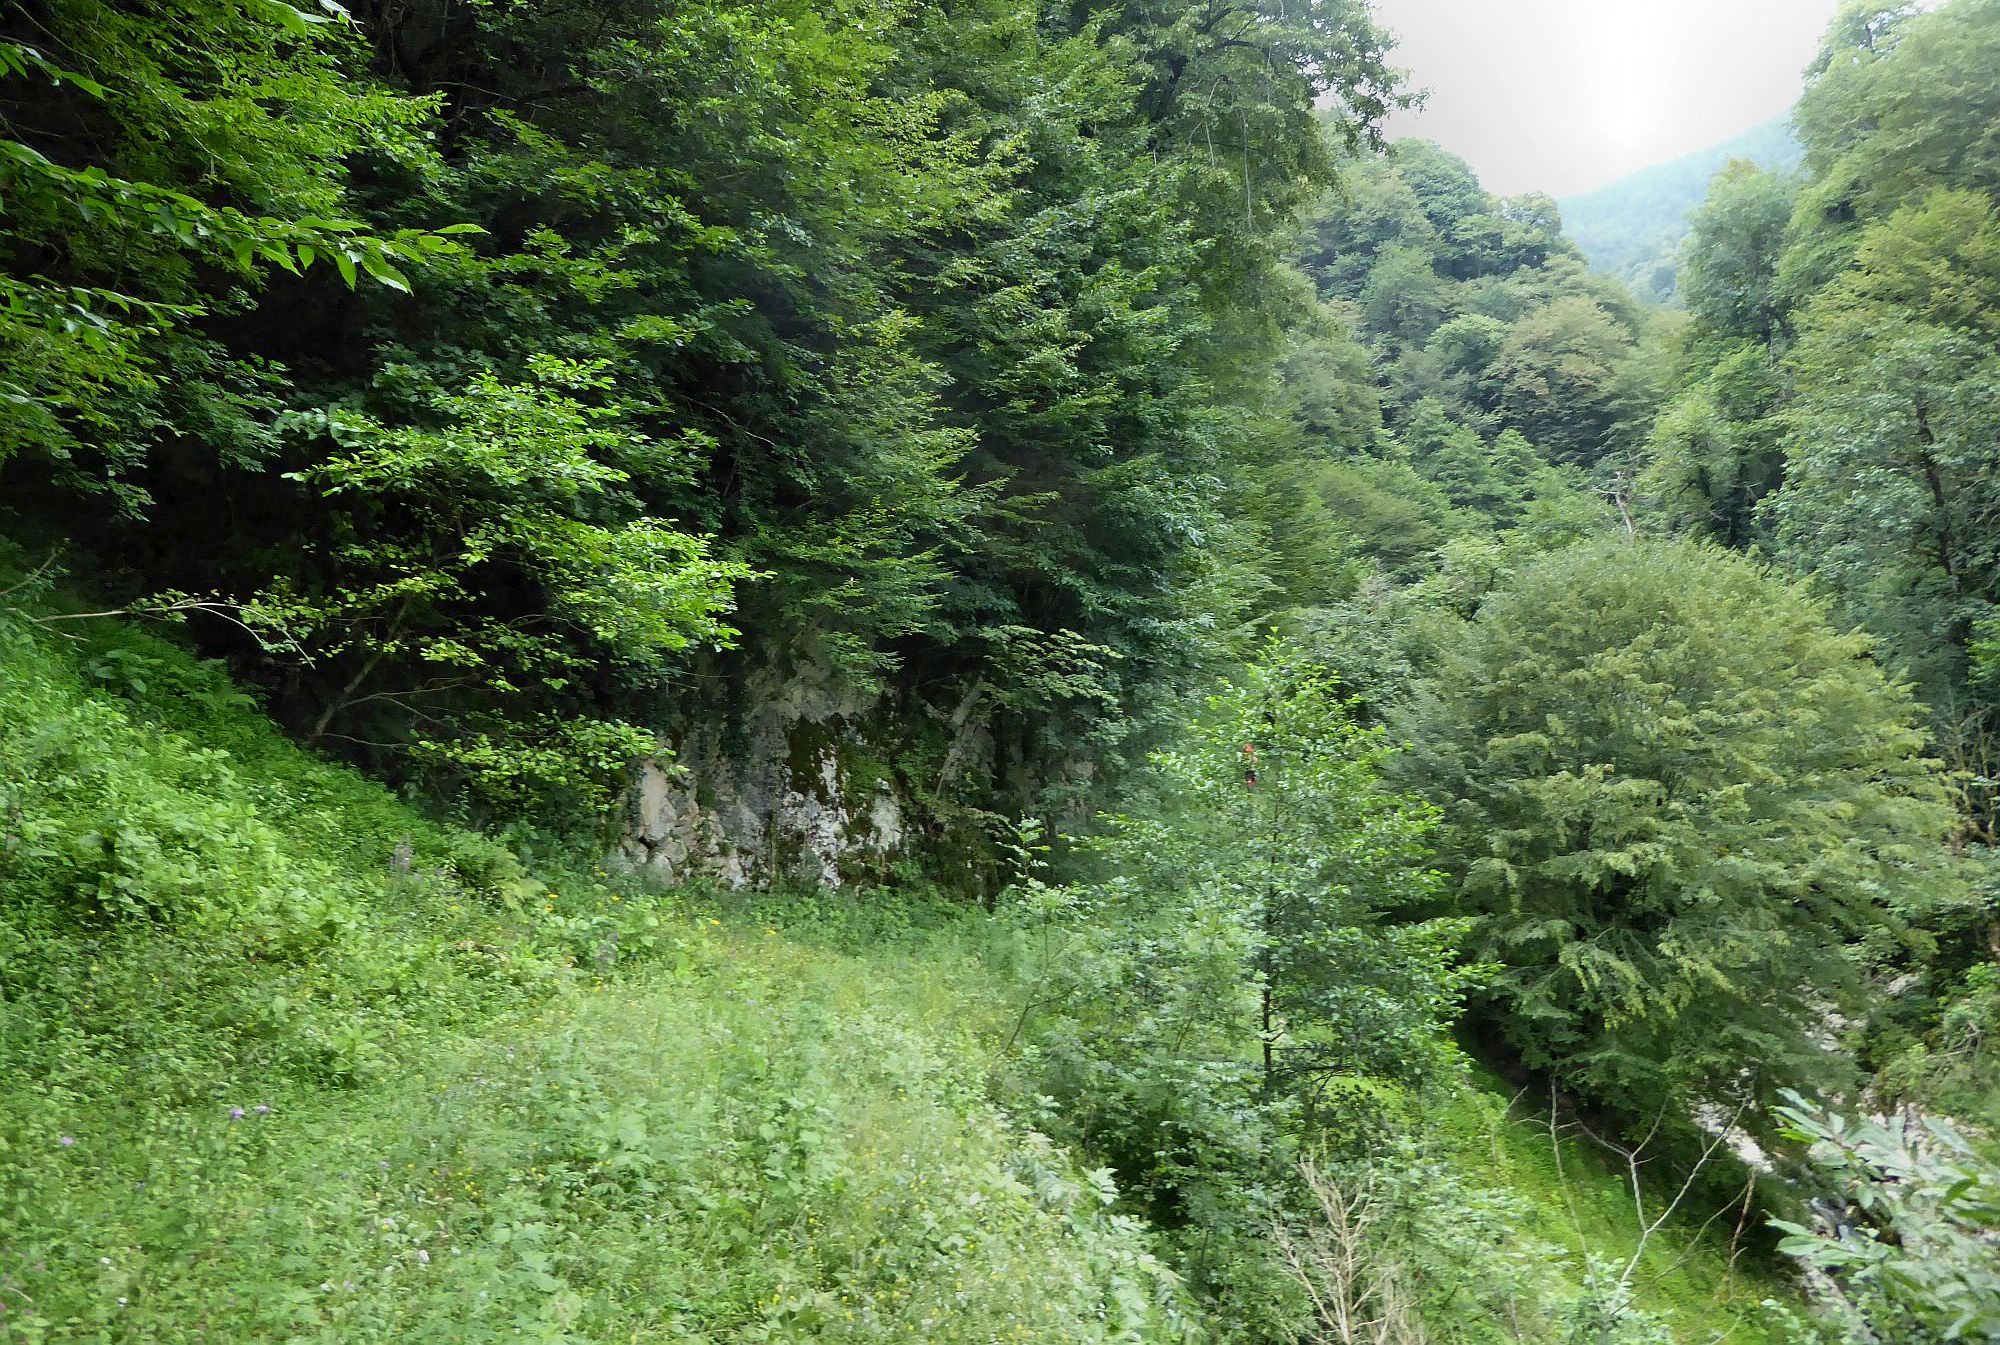 Remains of the old road above the Intsra river